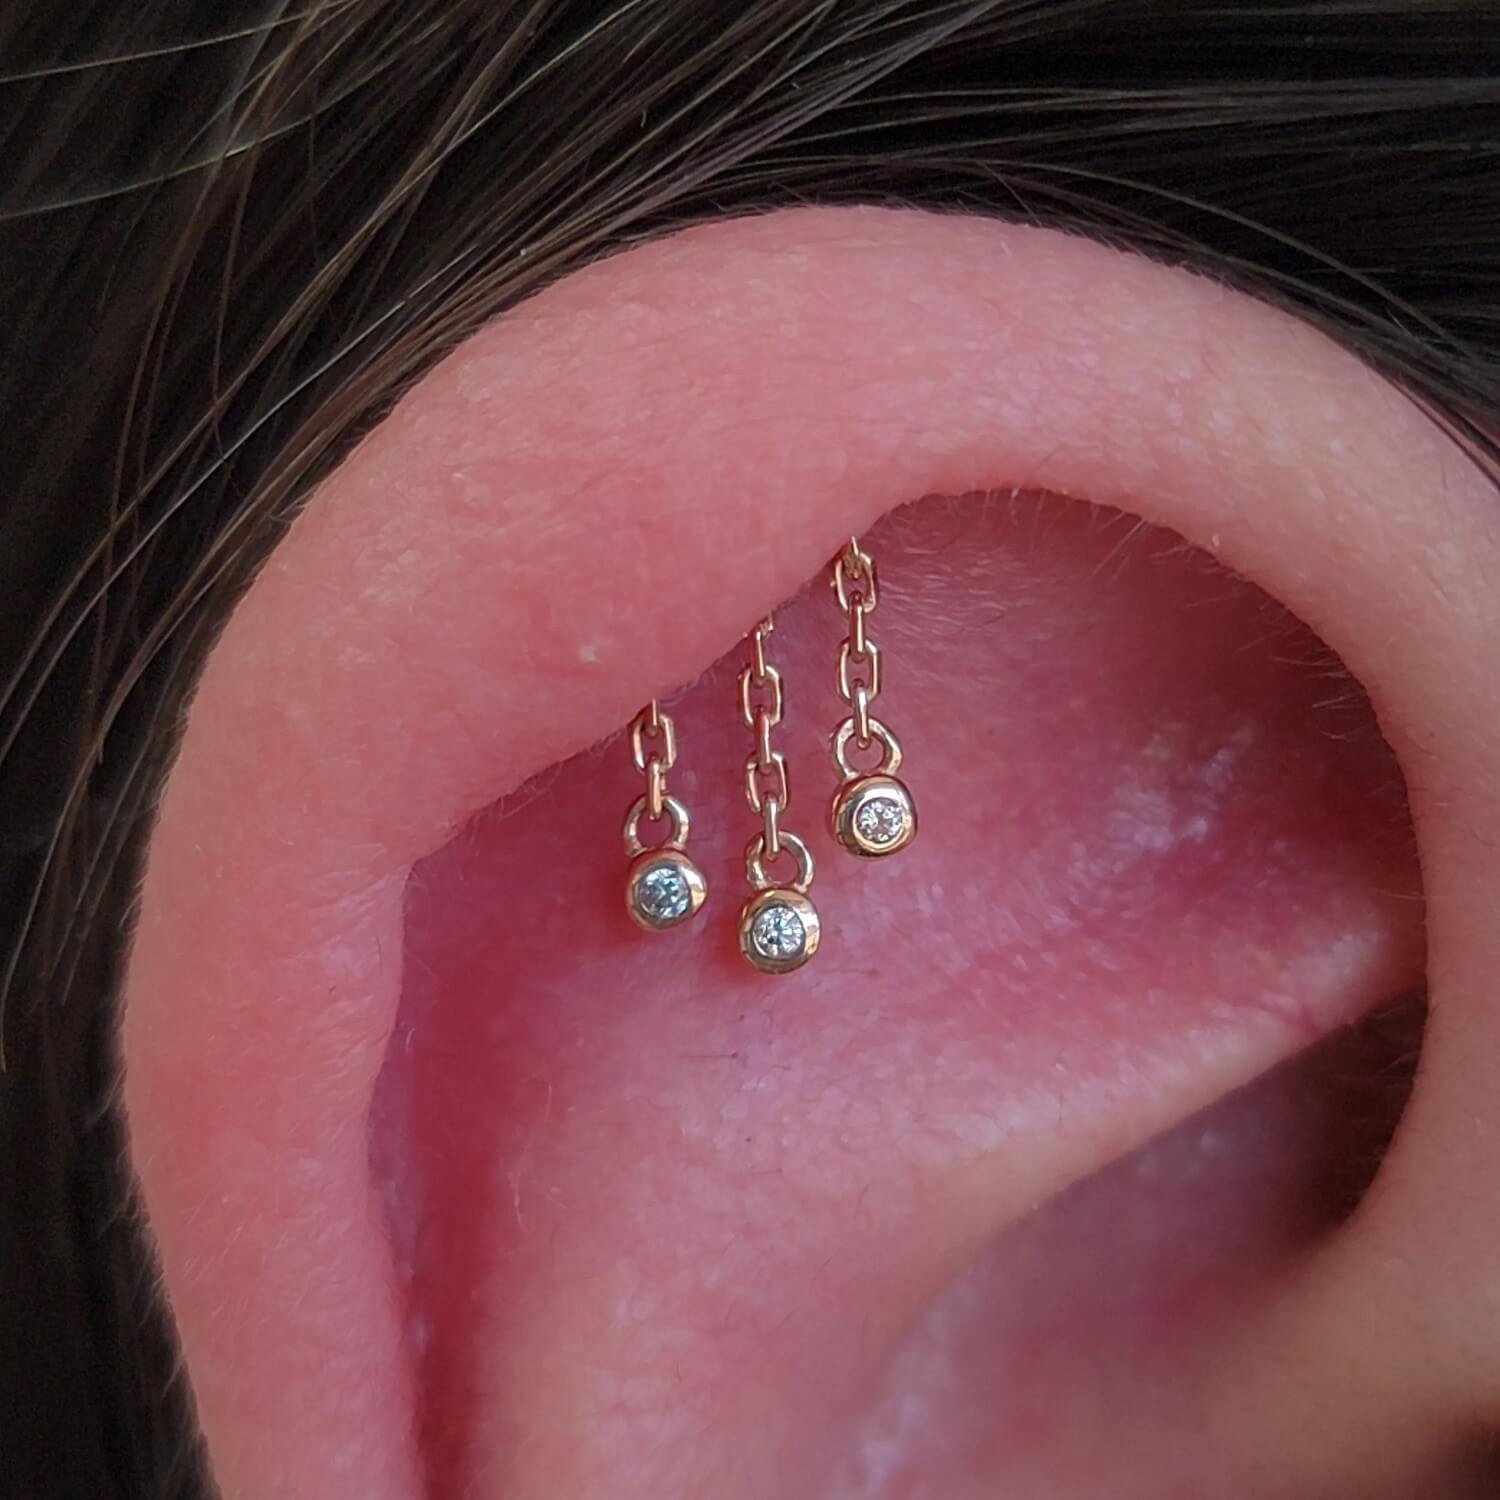 Helix piercing done with 14k yellow gold